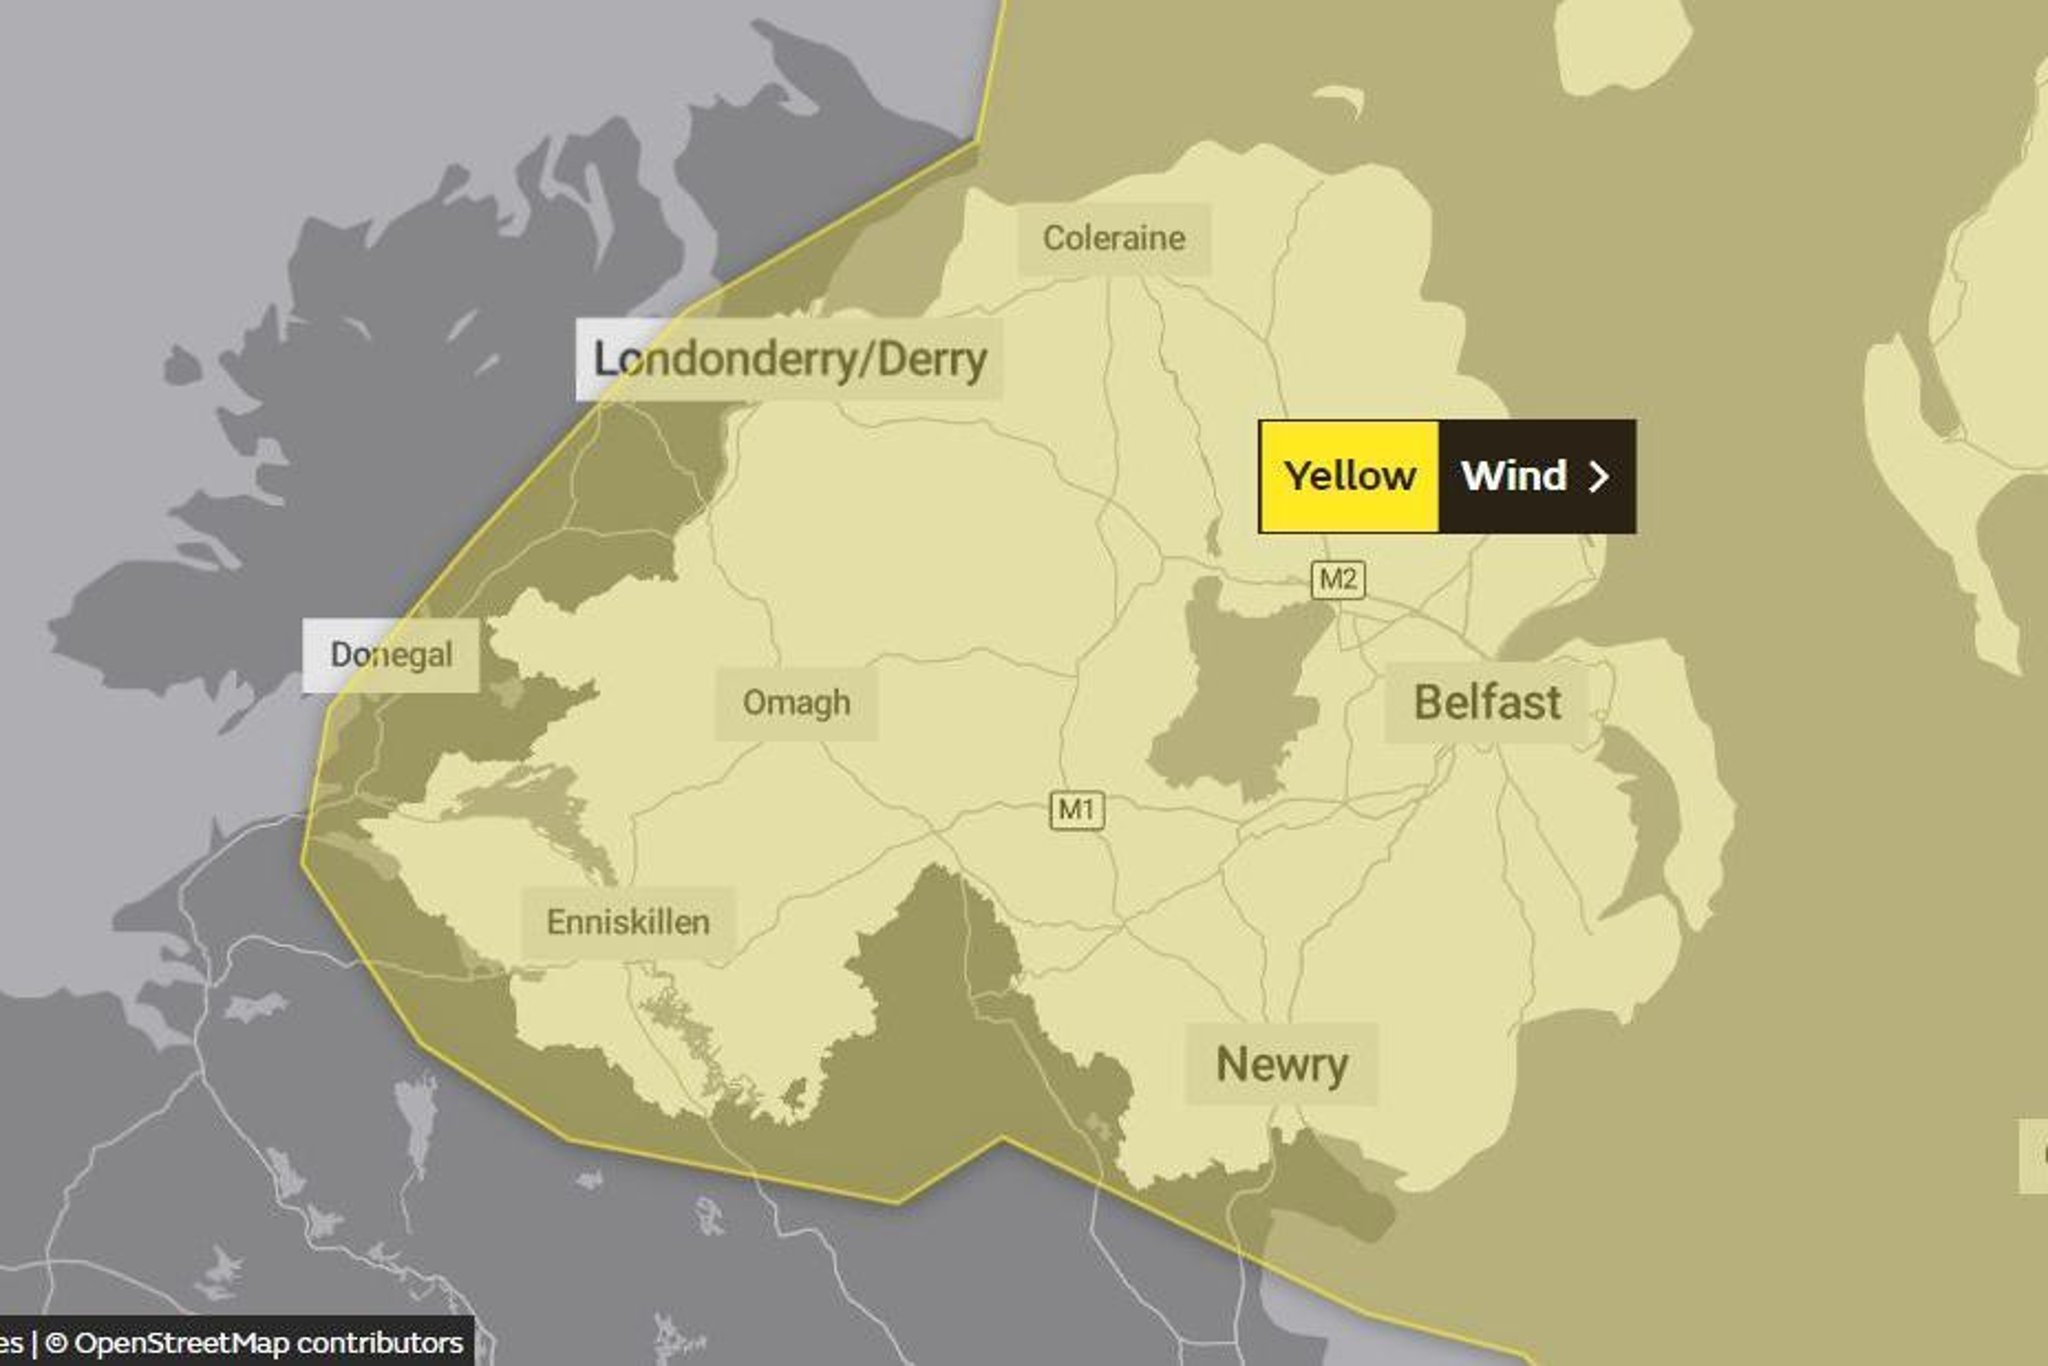 Met Office Yellow weather warning updated to cover all parts of Northern Ireland &#8211; High winds forecast